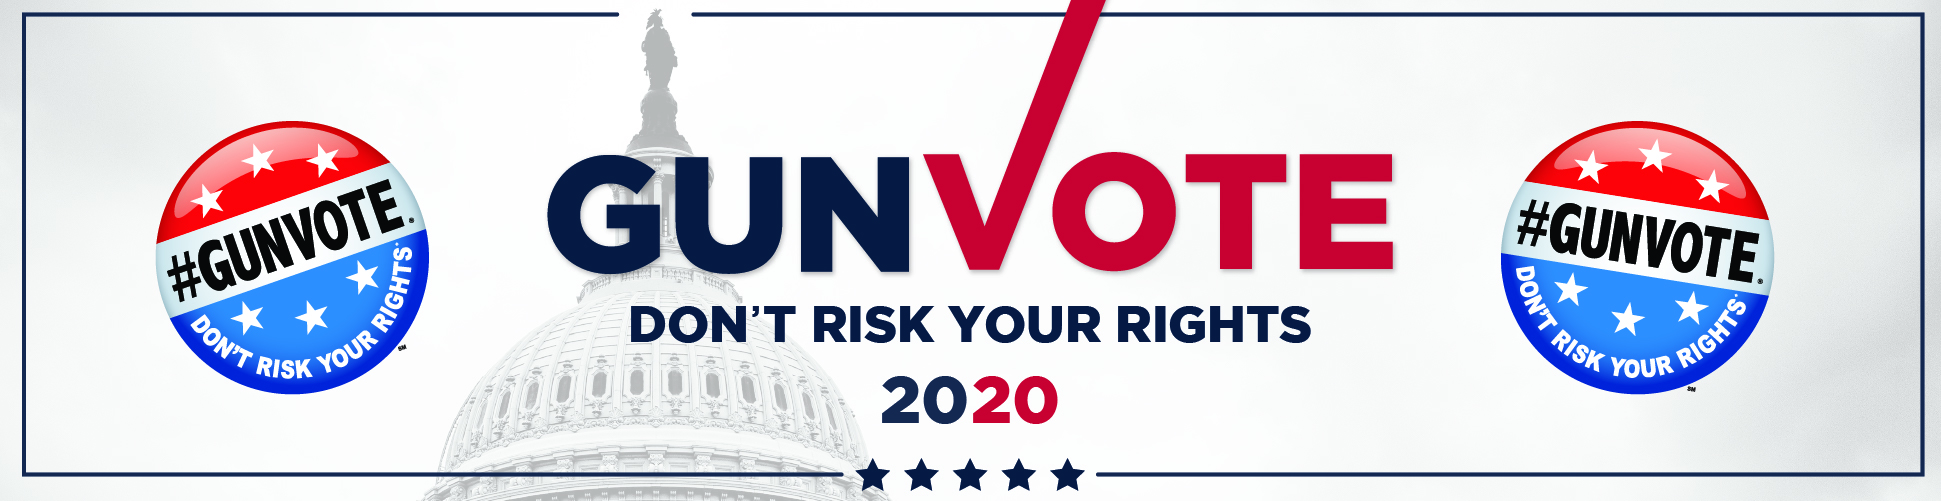 GUNVOTE | Don't Risk Your Rights